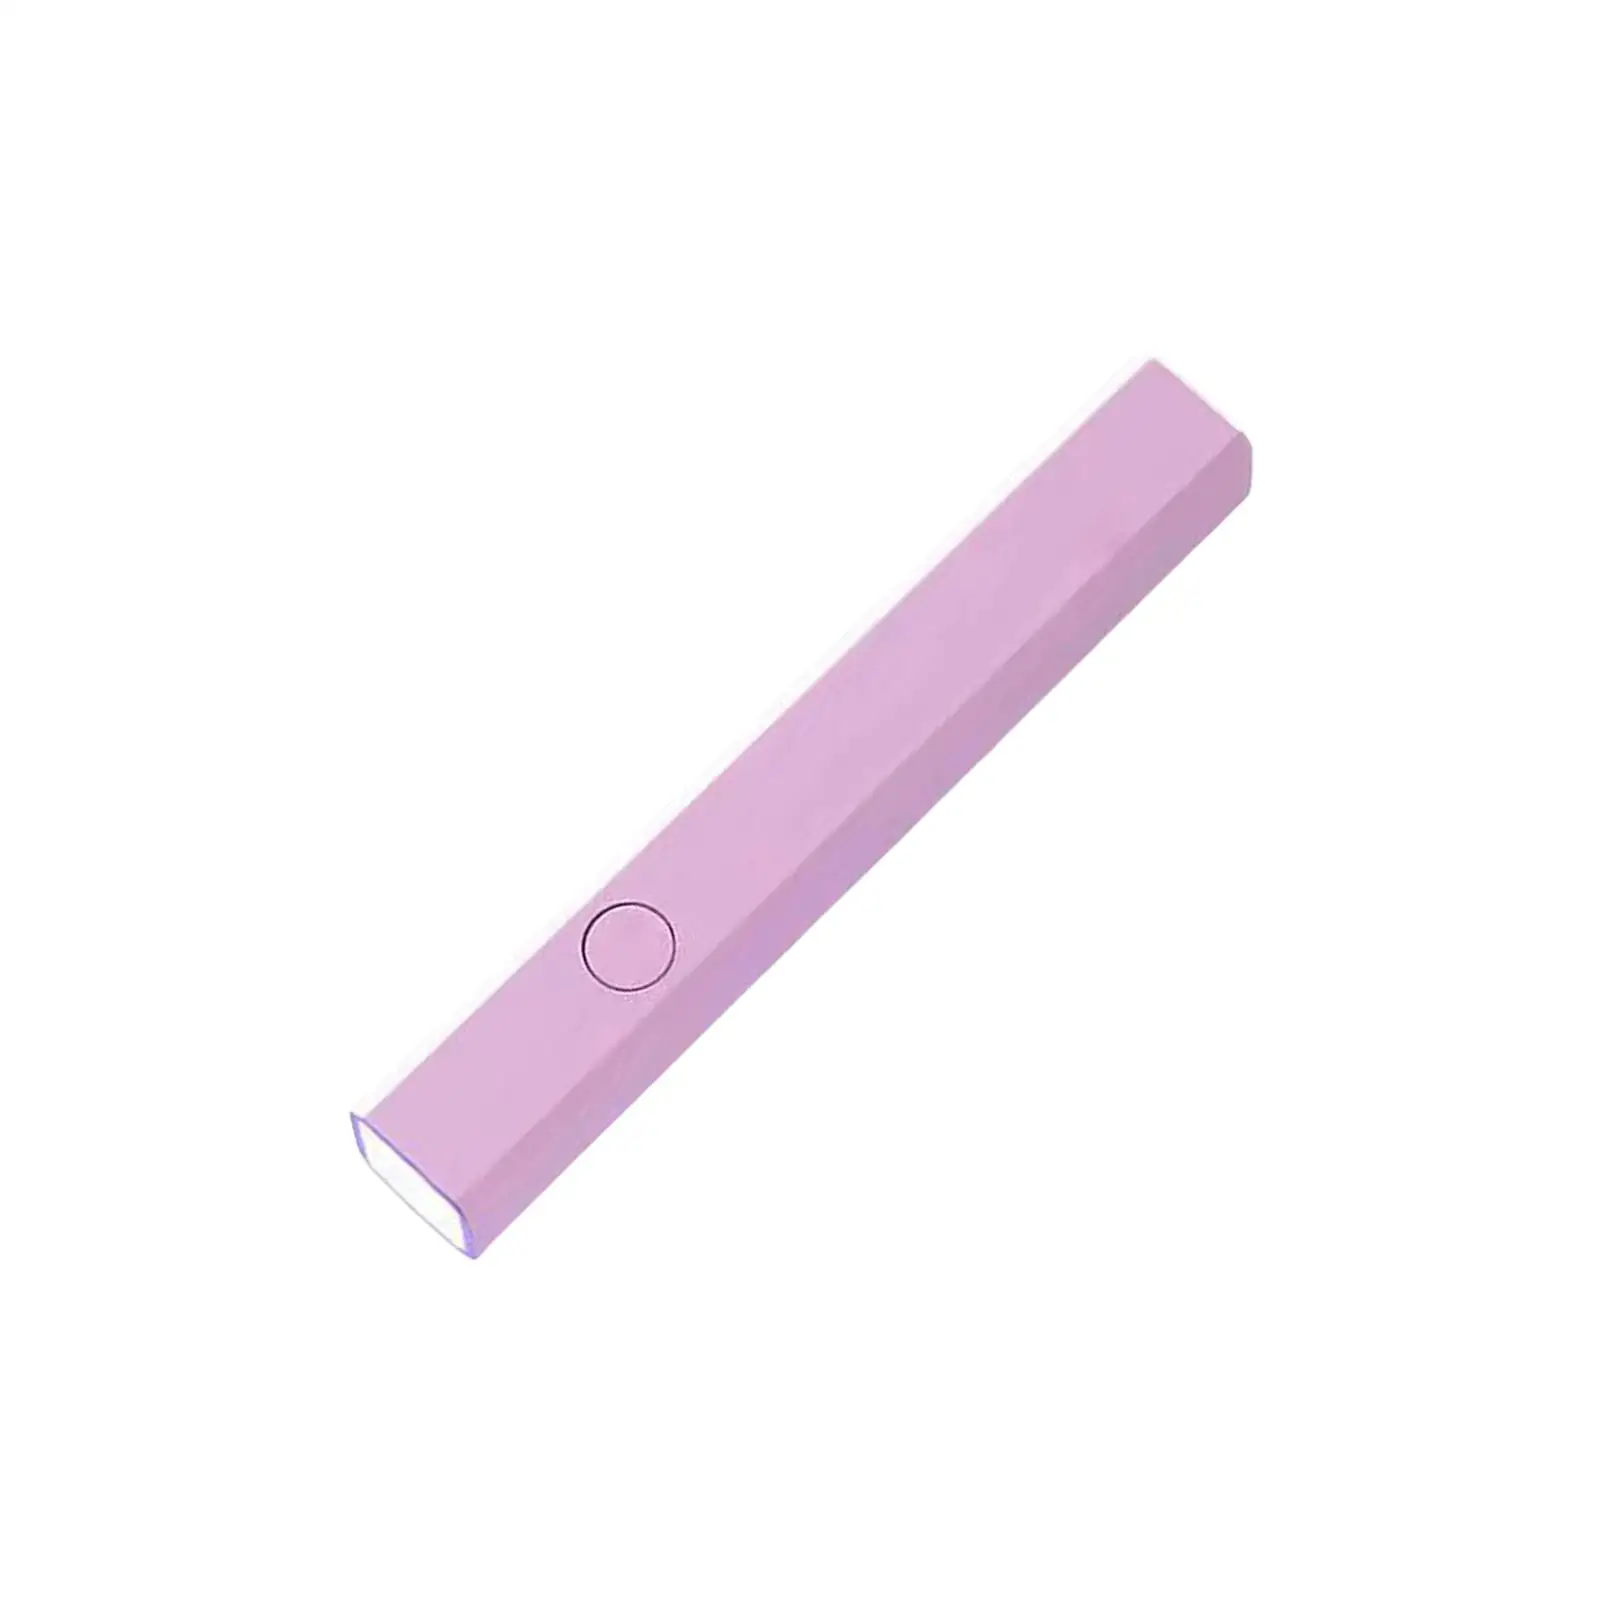 Handheld Nail Lamp Fast Curing Home Tools Small Manicure Lamp